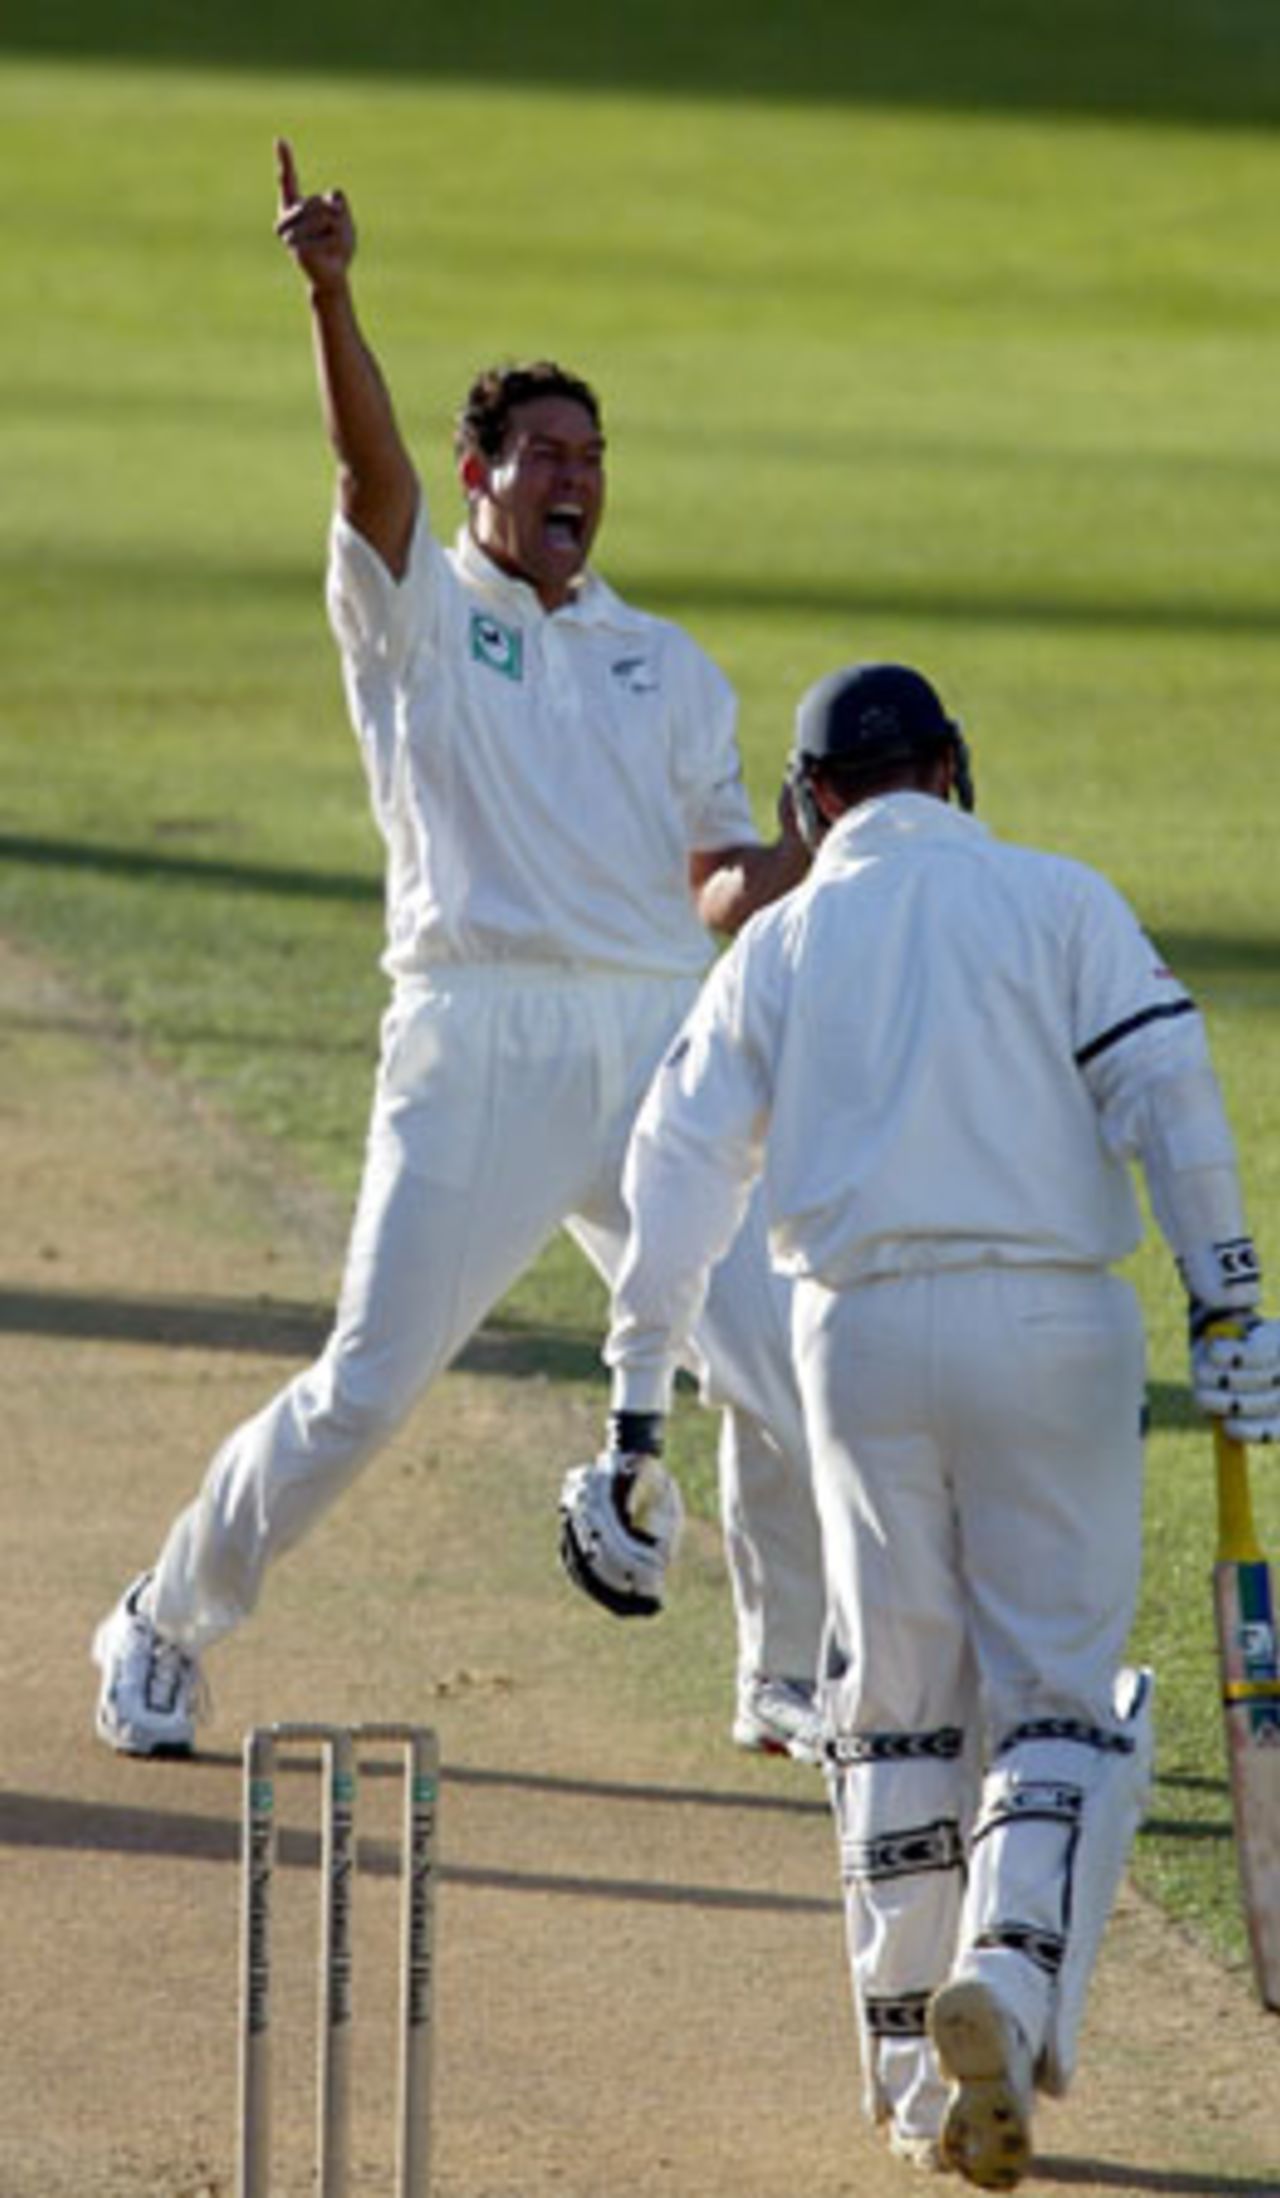 New Zealand bowler Daryl Tuffey celebrates the dismissal of England batsman Marcus Trescothick, lbw for 0. 3rd Test: New Zealand v England at Eden Park, Auckland, 30 March-3 April 2002 (1 April 2002).